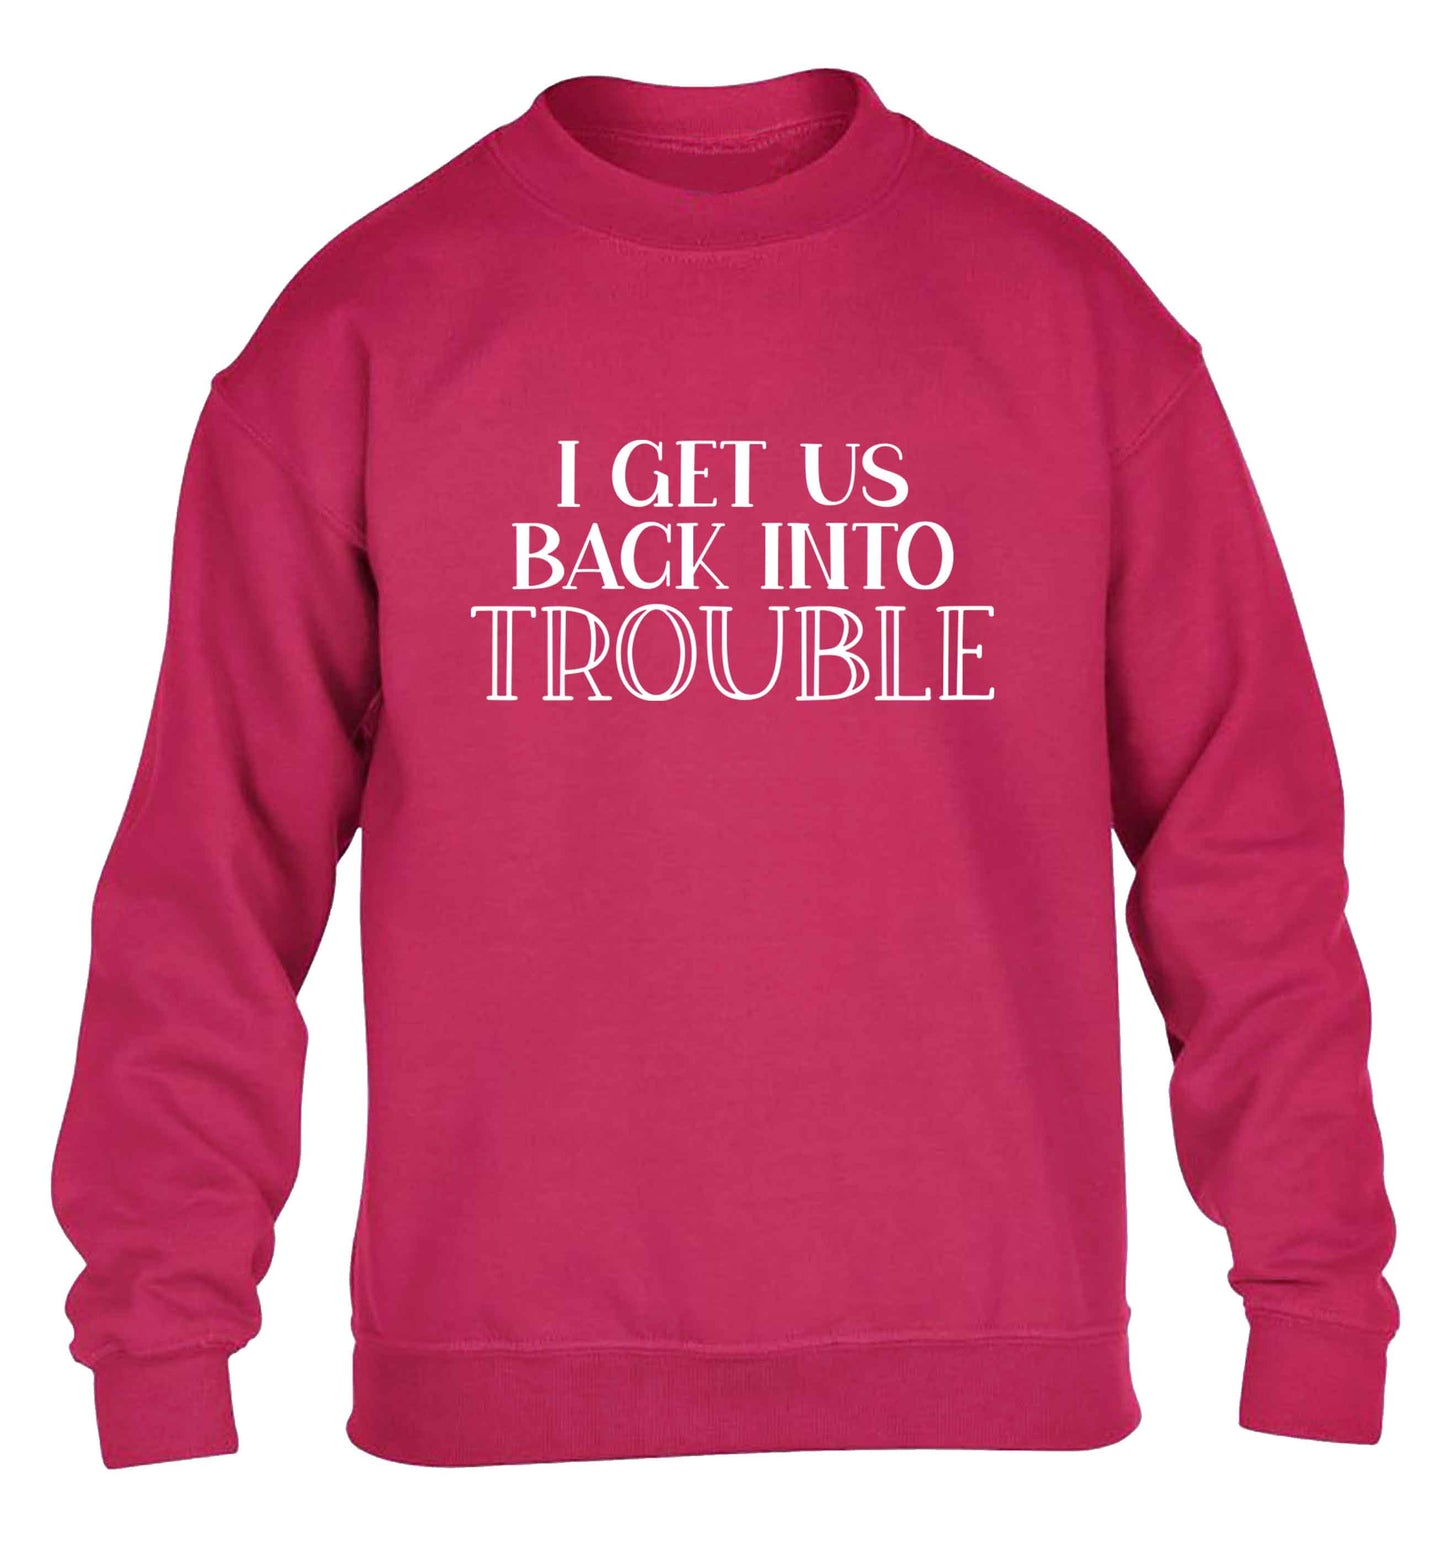 I get us back into trouble children's pink sweater 12-13 Years